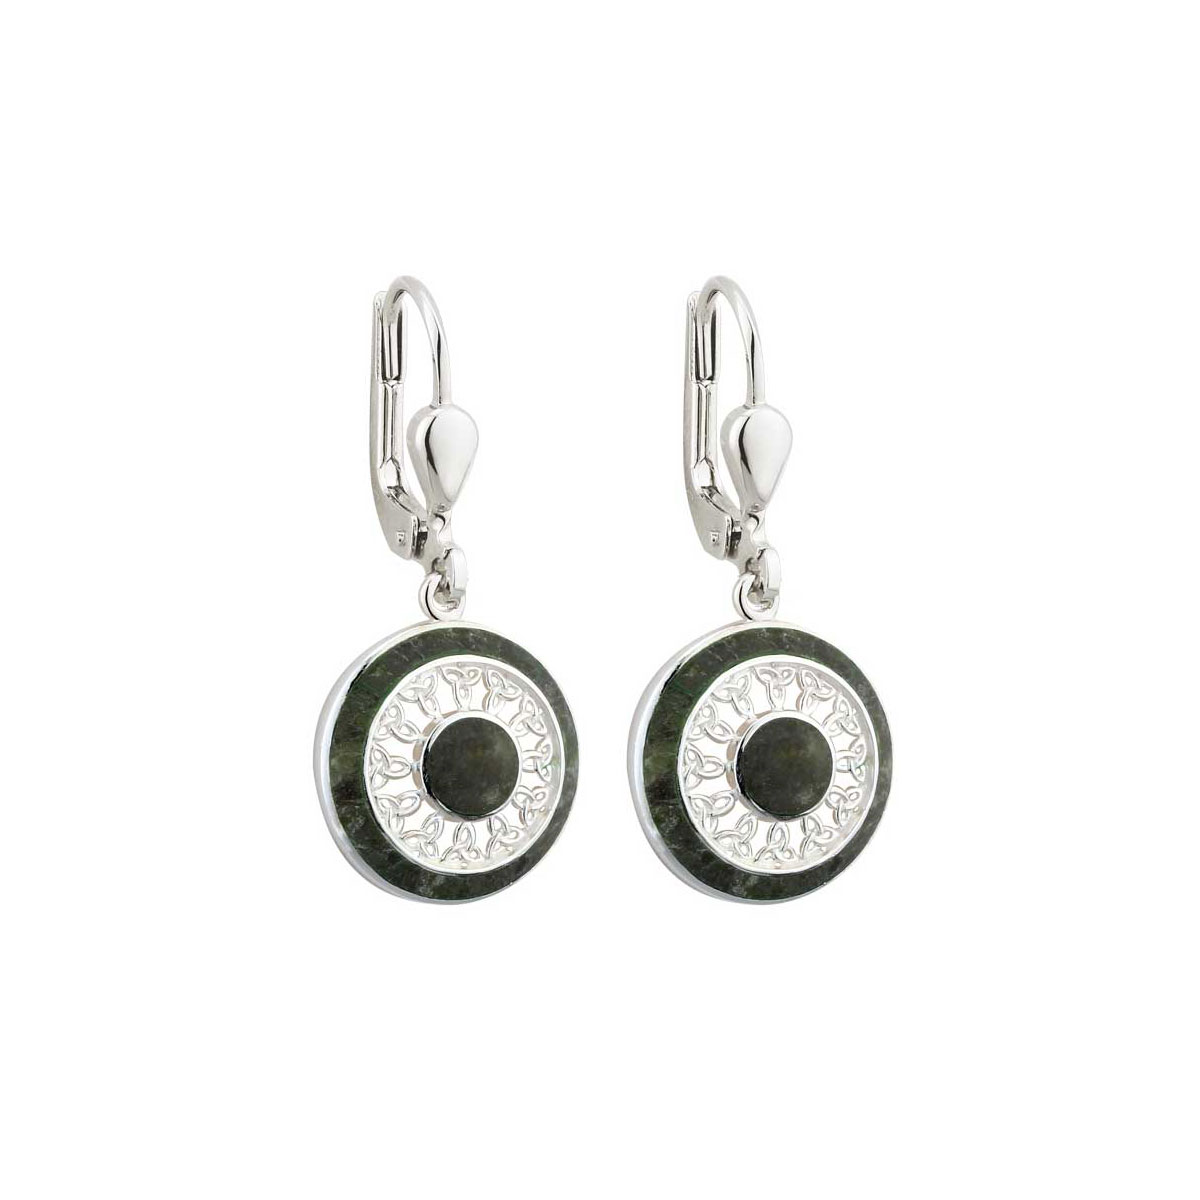 Cashs Ireland, Sterling Silver and Connemara Marble Round Trinity Earrings Pair